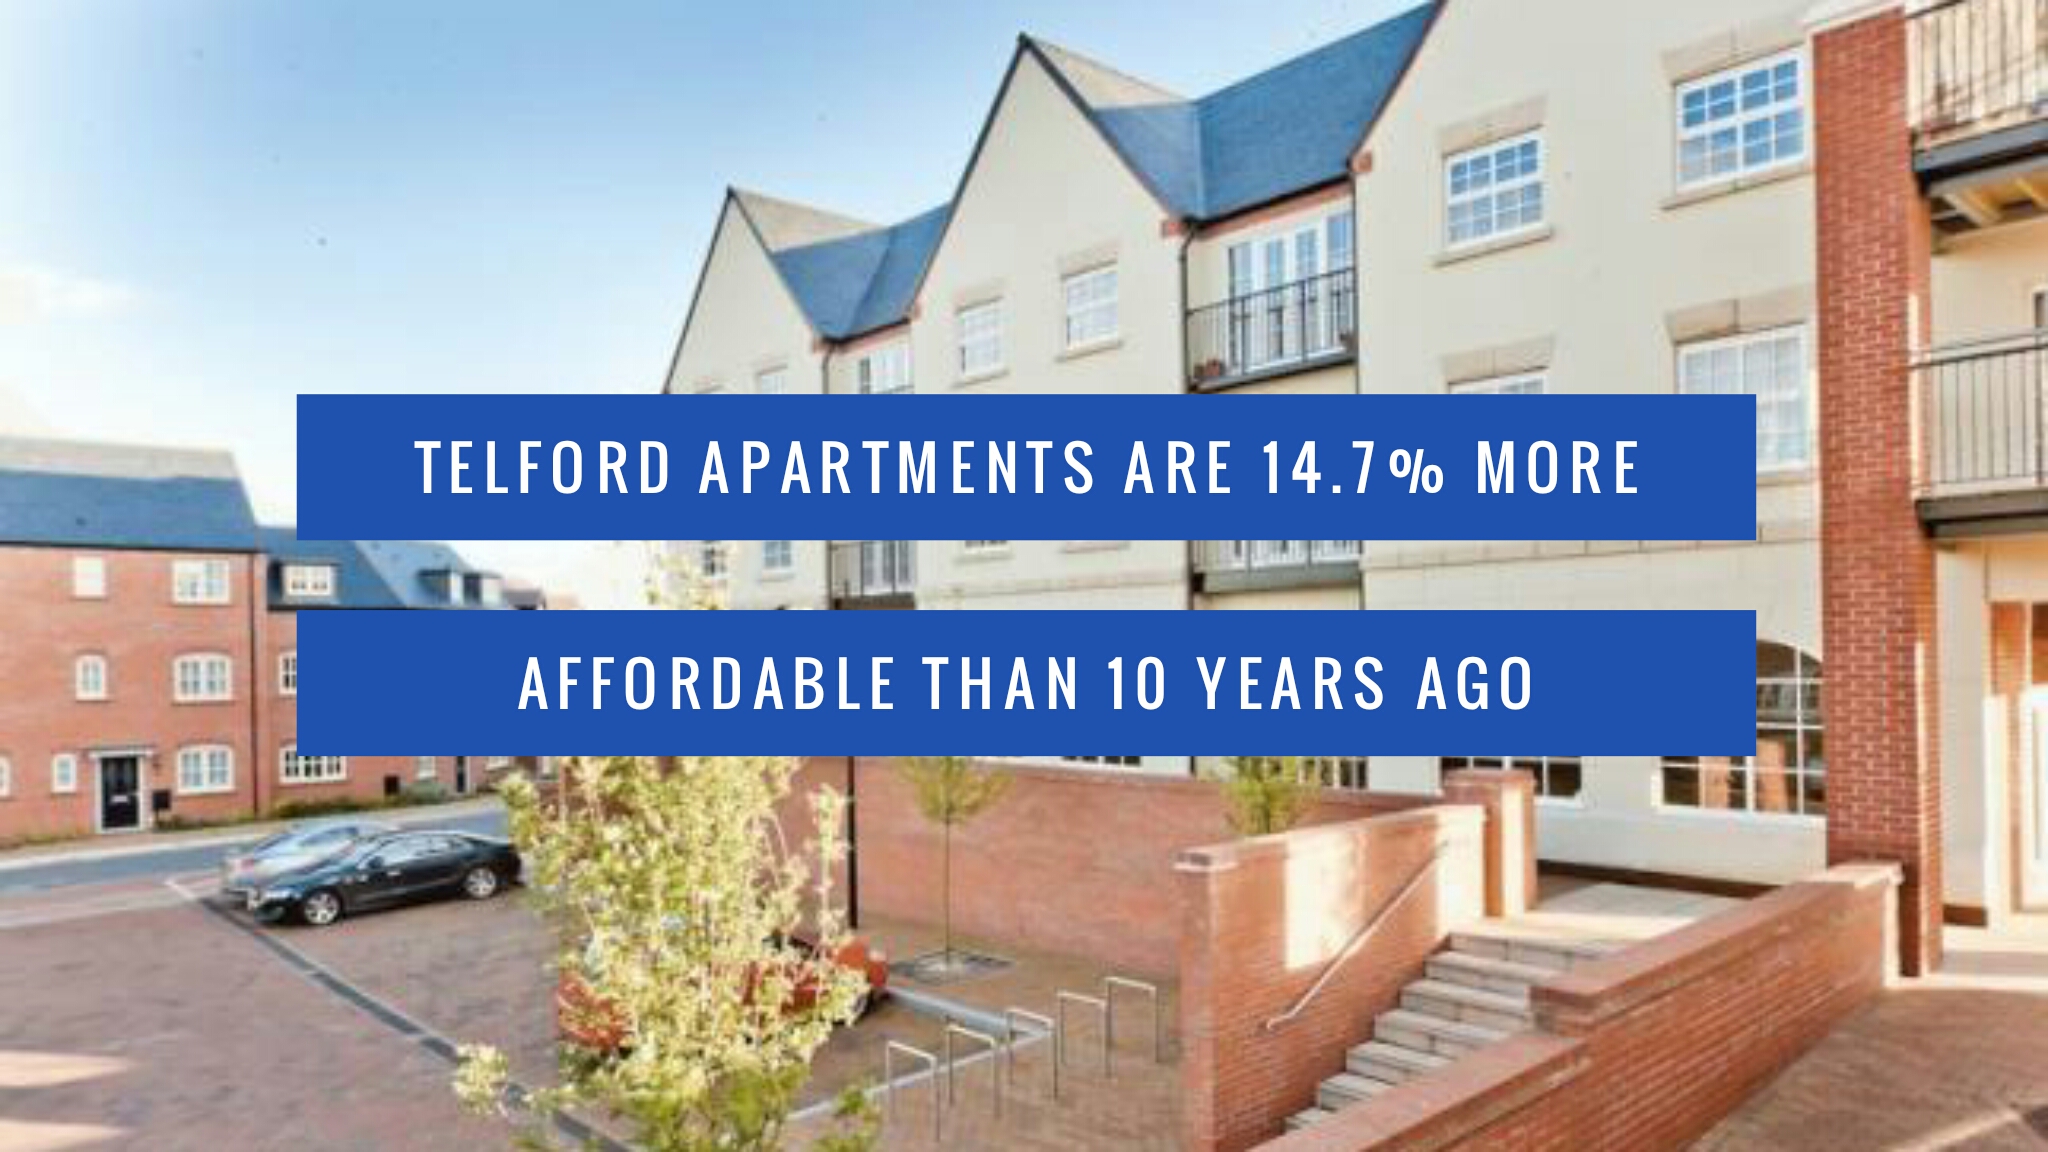 Telford Apartments are 14.7% more affordable than 10 years ago